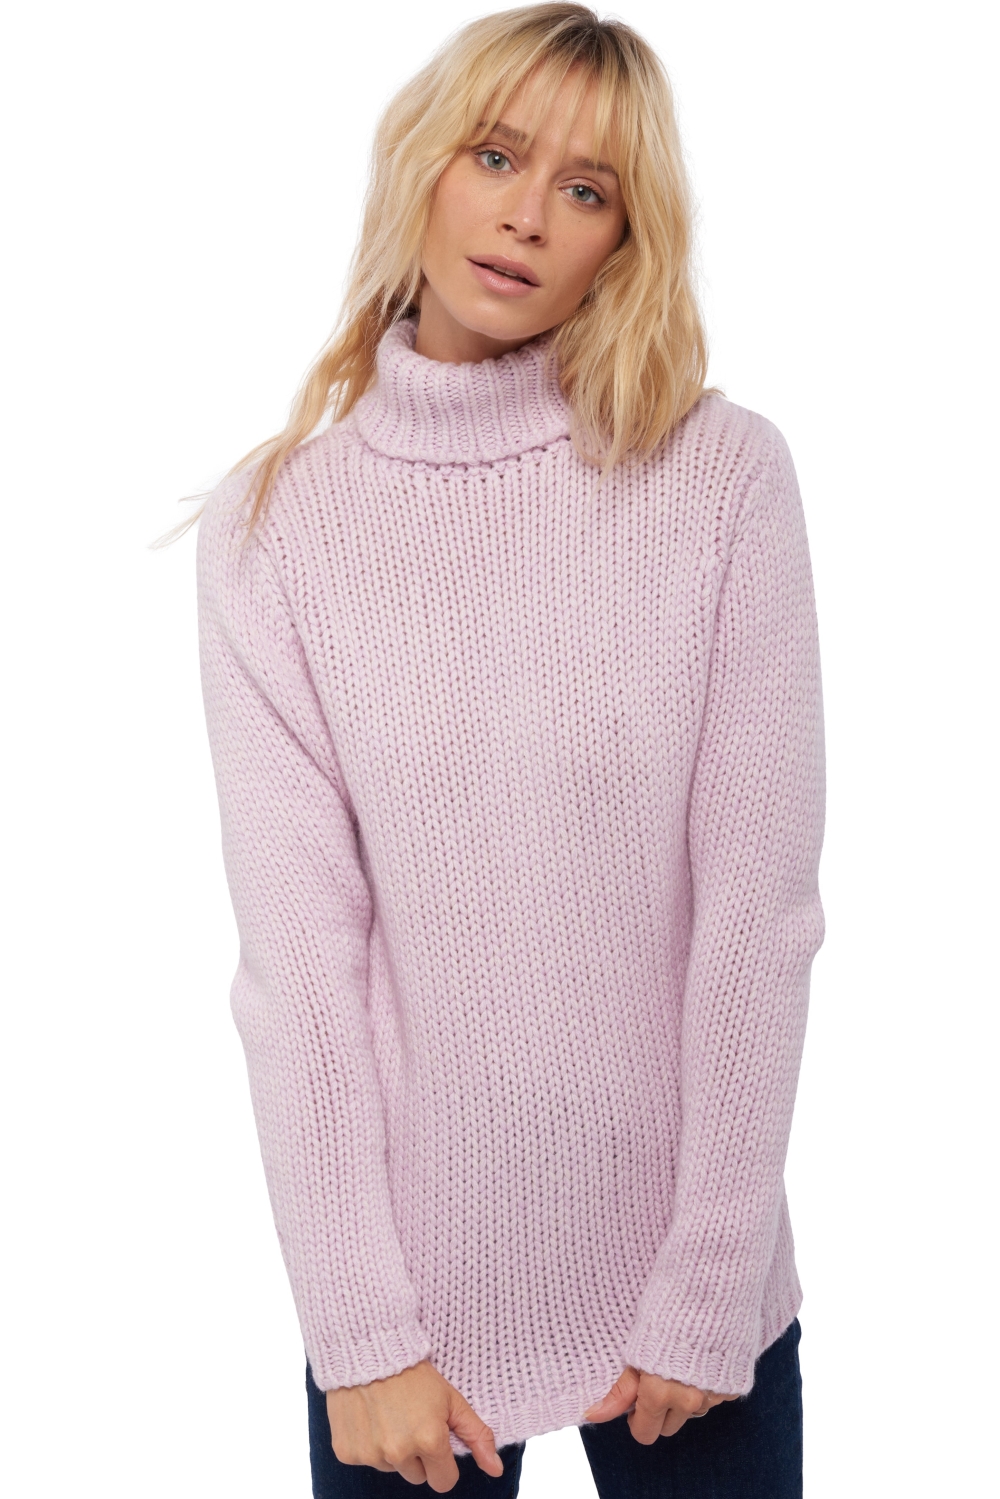 Cachemire pull femme vicenza lilas rose pale m